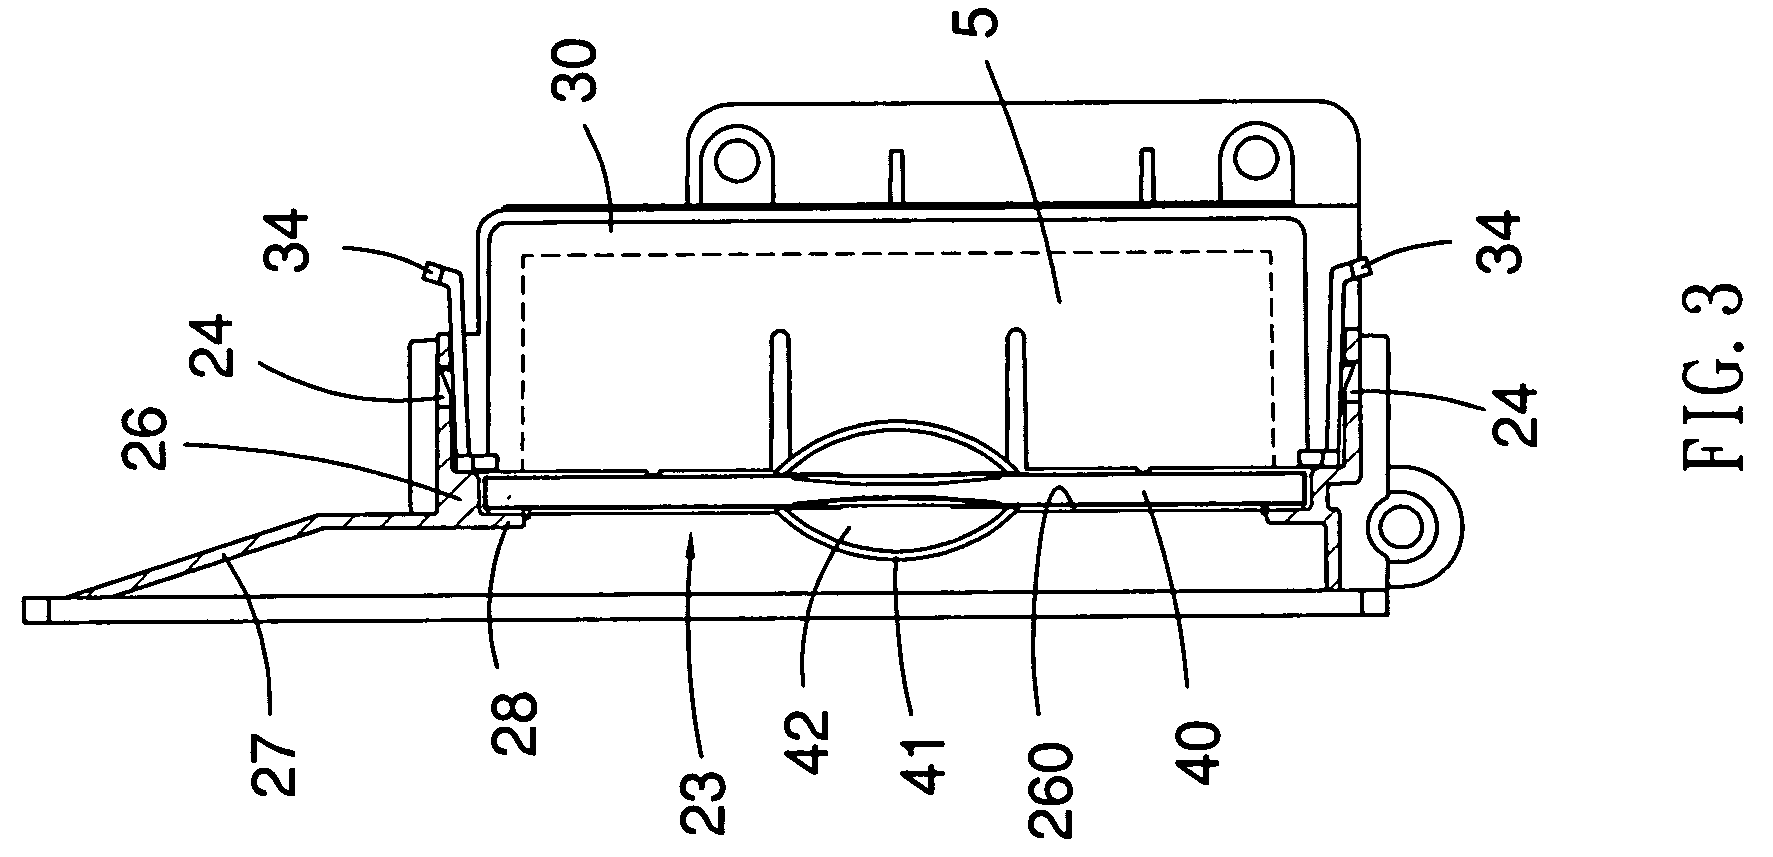 Fan fixture and housing assembly containing the fan fixture